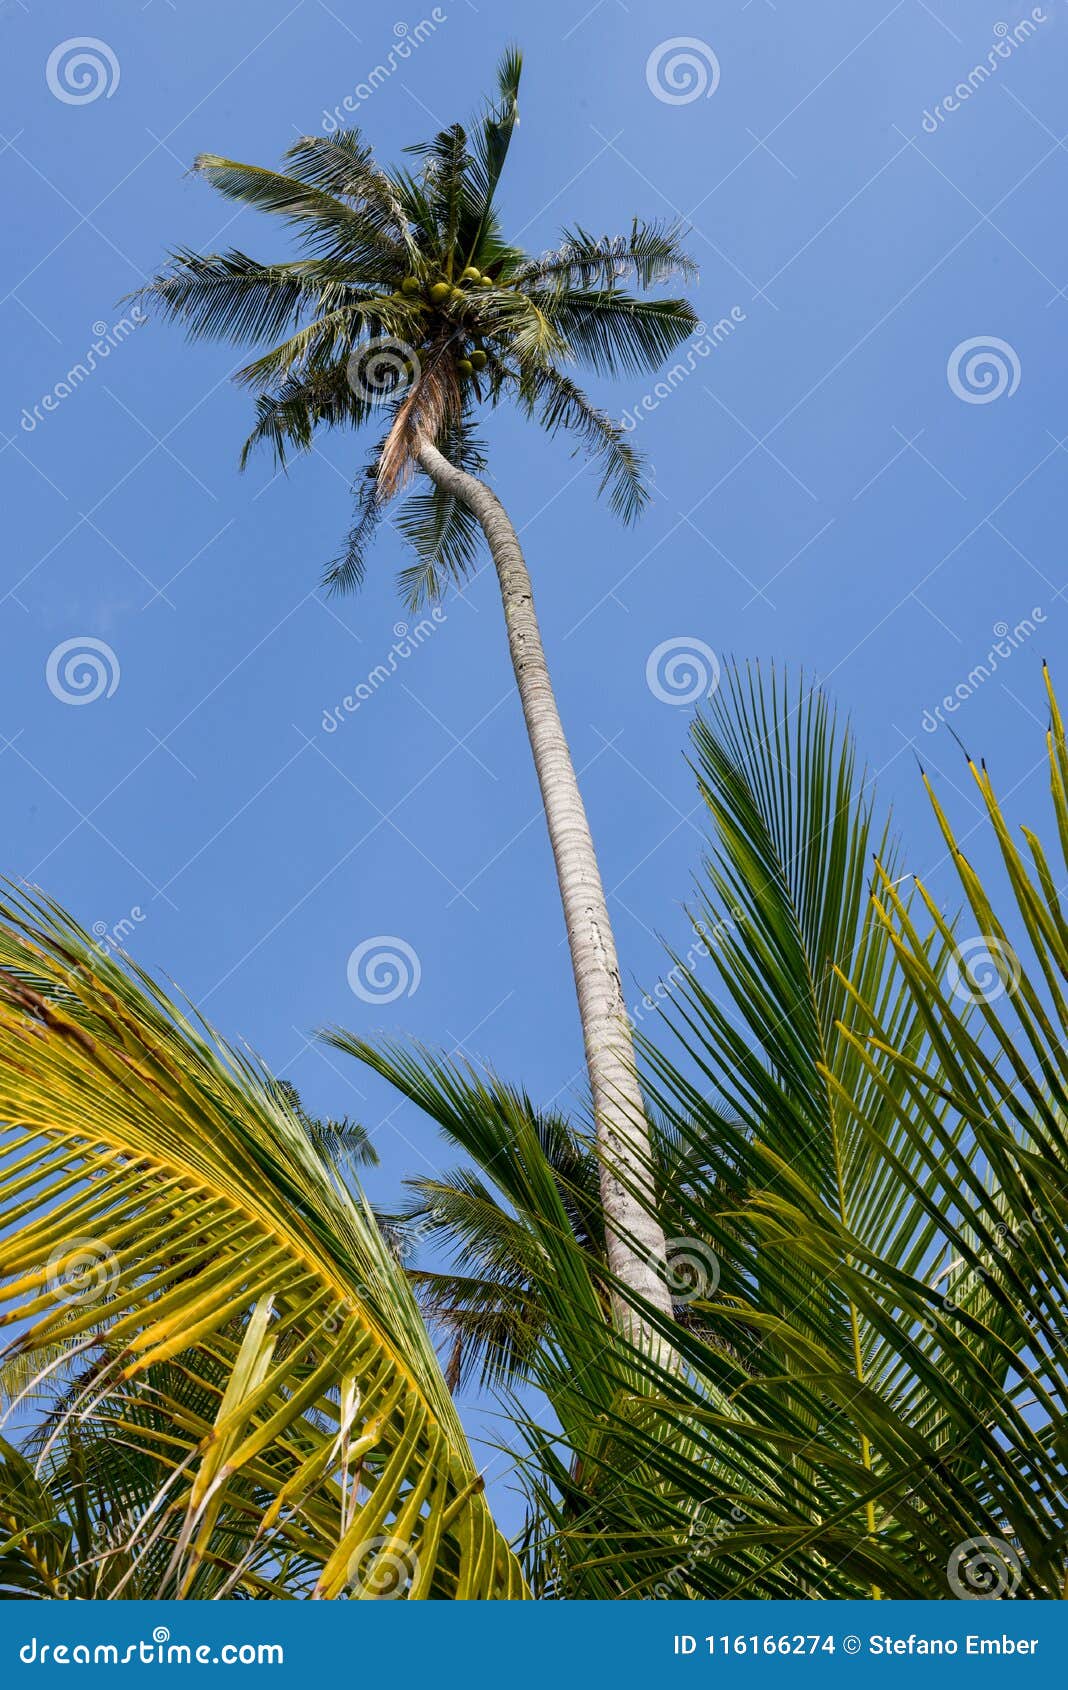 Nice Palm Tree with Coconut in the Blue Sunny Sky Stock Photo - Image ...